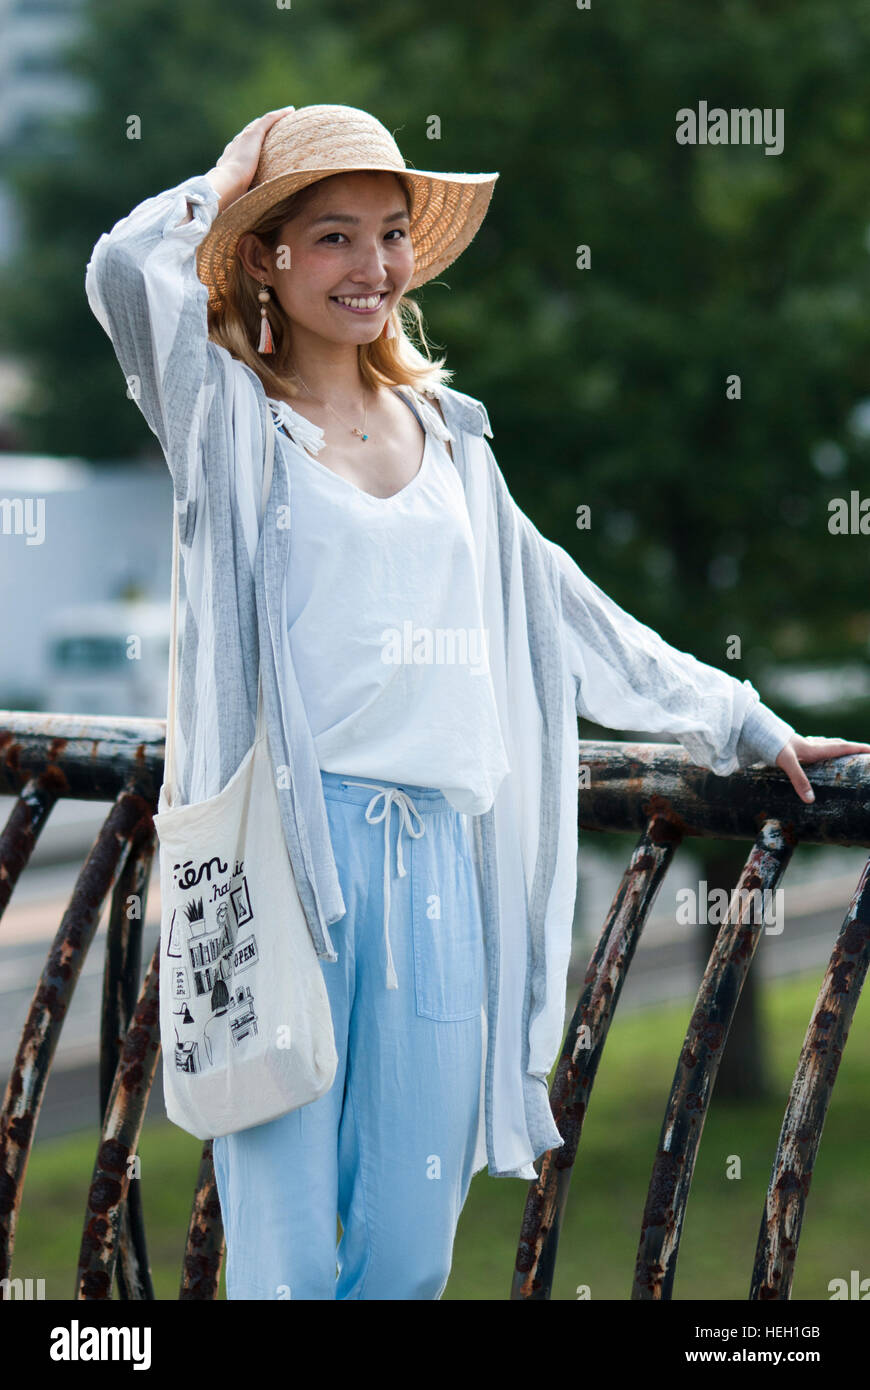 Happy, beautiful Japanese girl wearing a straw hat and smiling at the camera Stock Photo